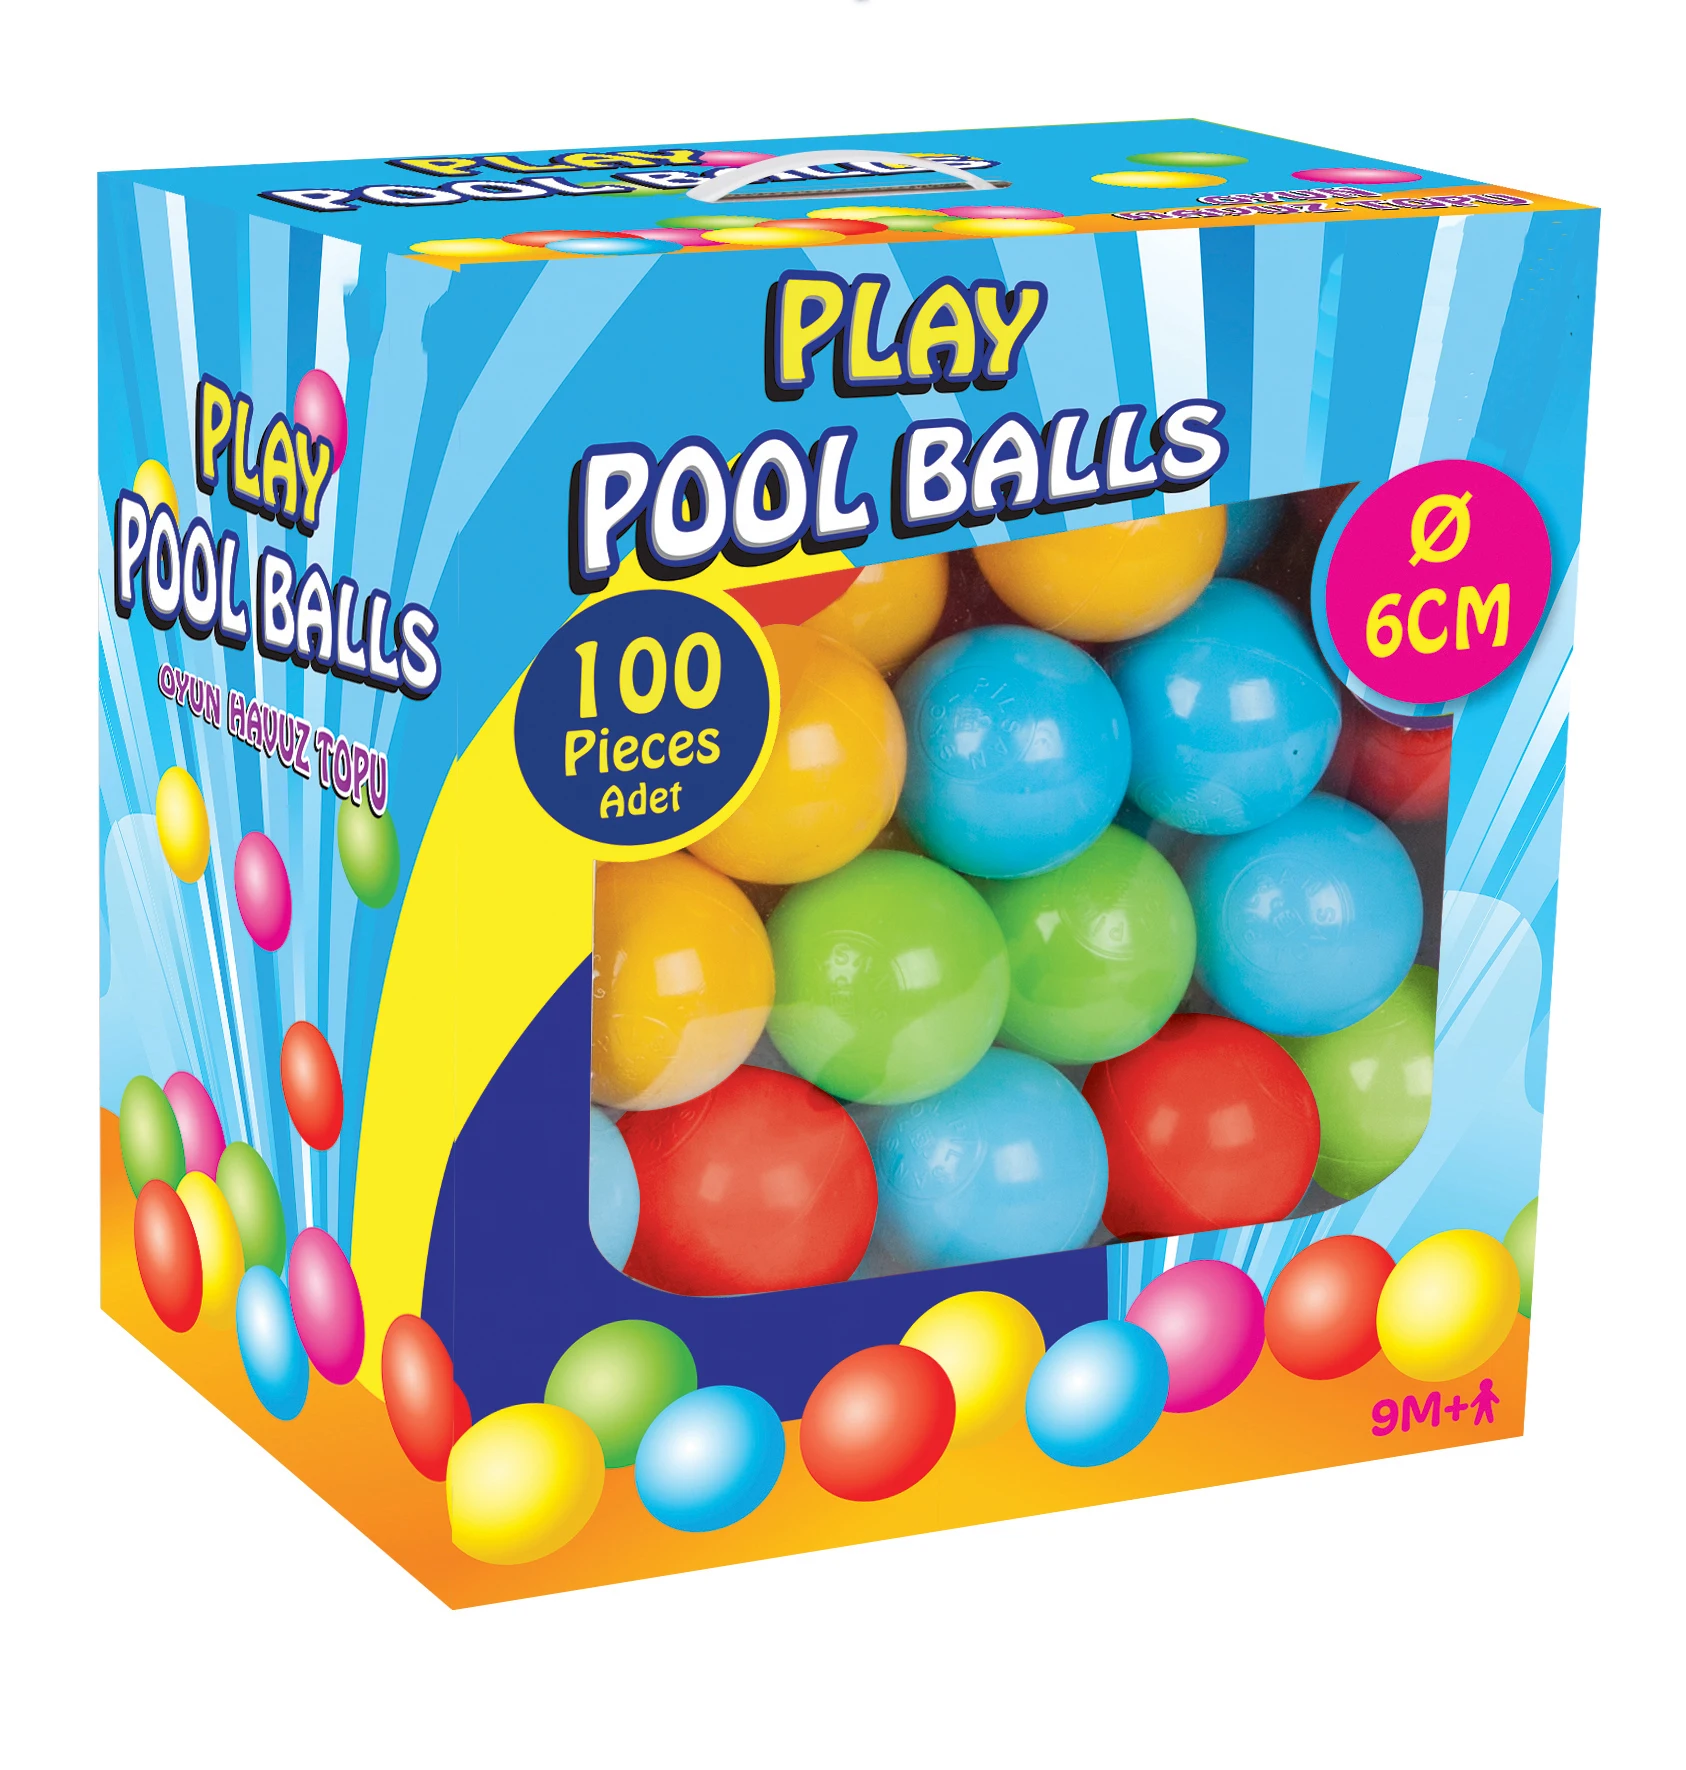 5cm Pit Balls for Kids Birthday Pool Tent Party Favors Summer Water Bath Toy Kids Play Balls Crush Proof Ocean Balls Colorful Ball Swim Pit Toy Balacoo 100pcs 5 